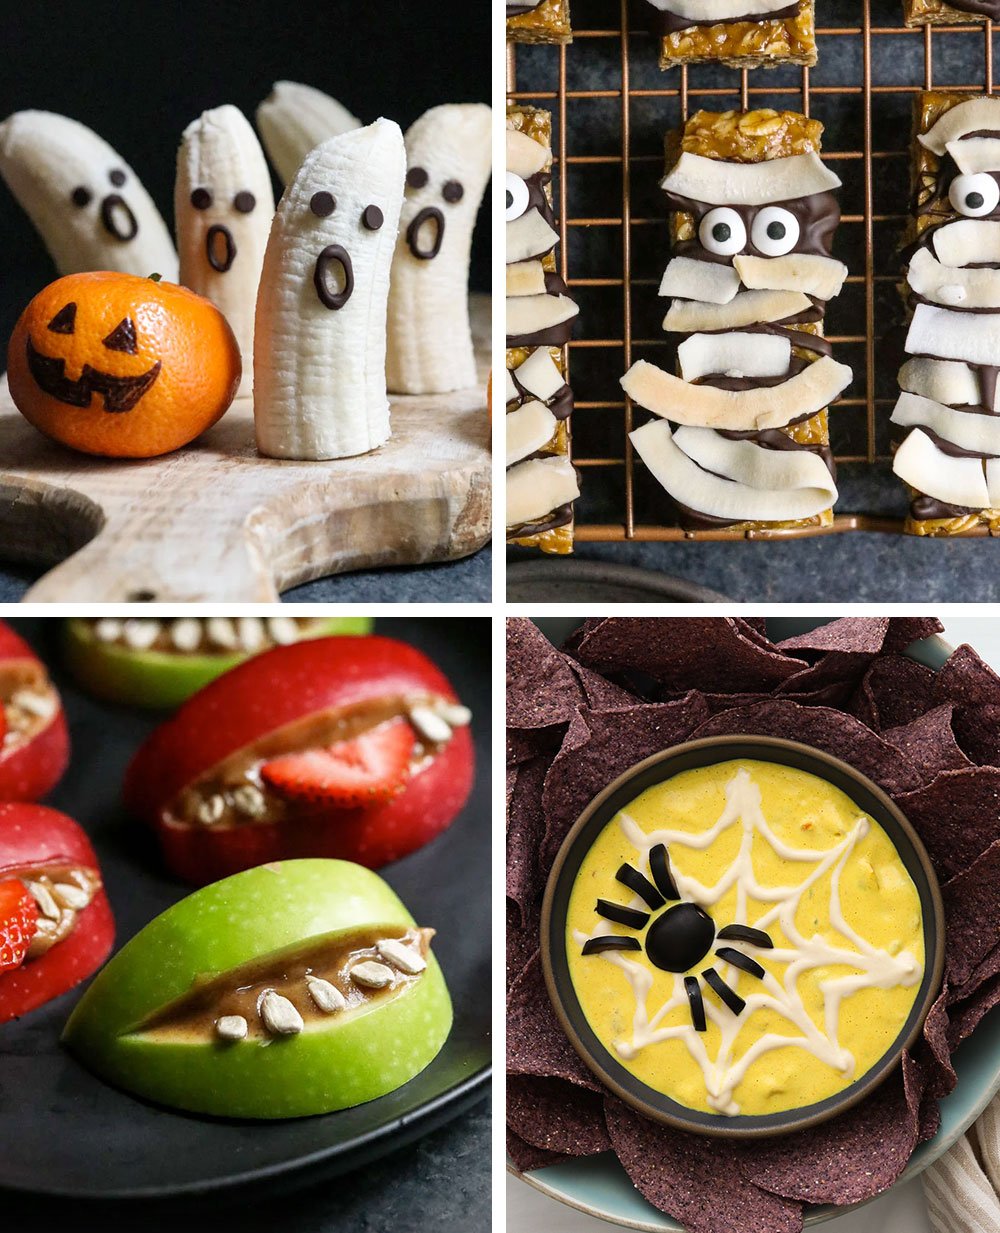 healthy halloween food ideas like banana ghosts and apple monster mouths.